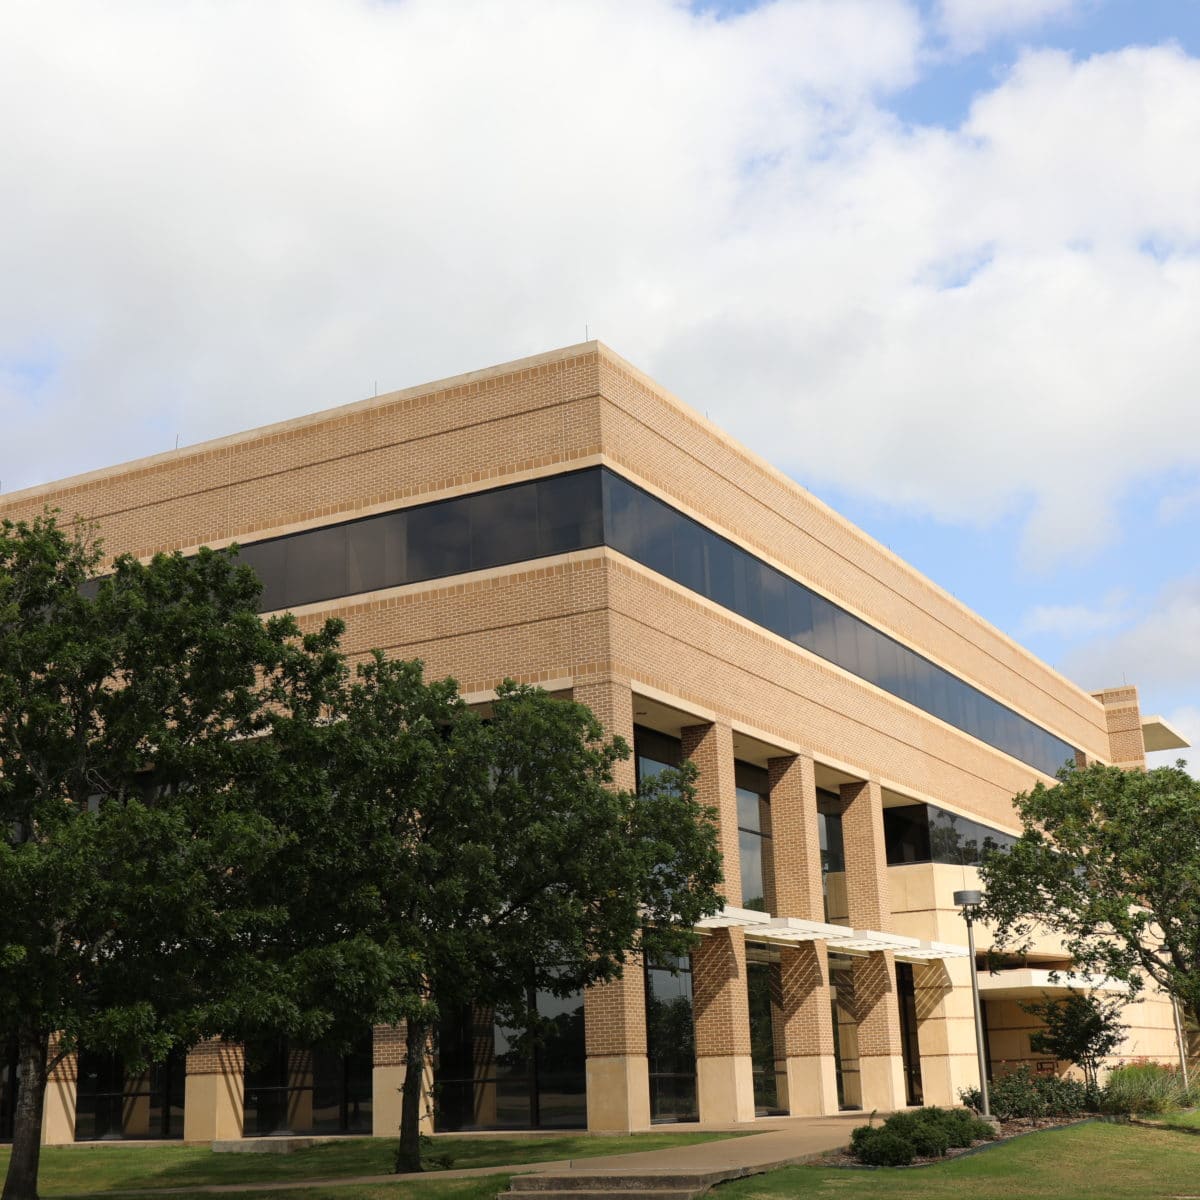 Gilchrist Building on the Texas A&M campus